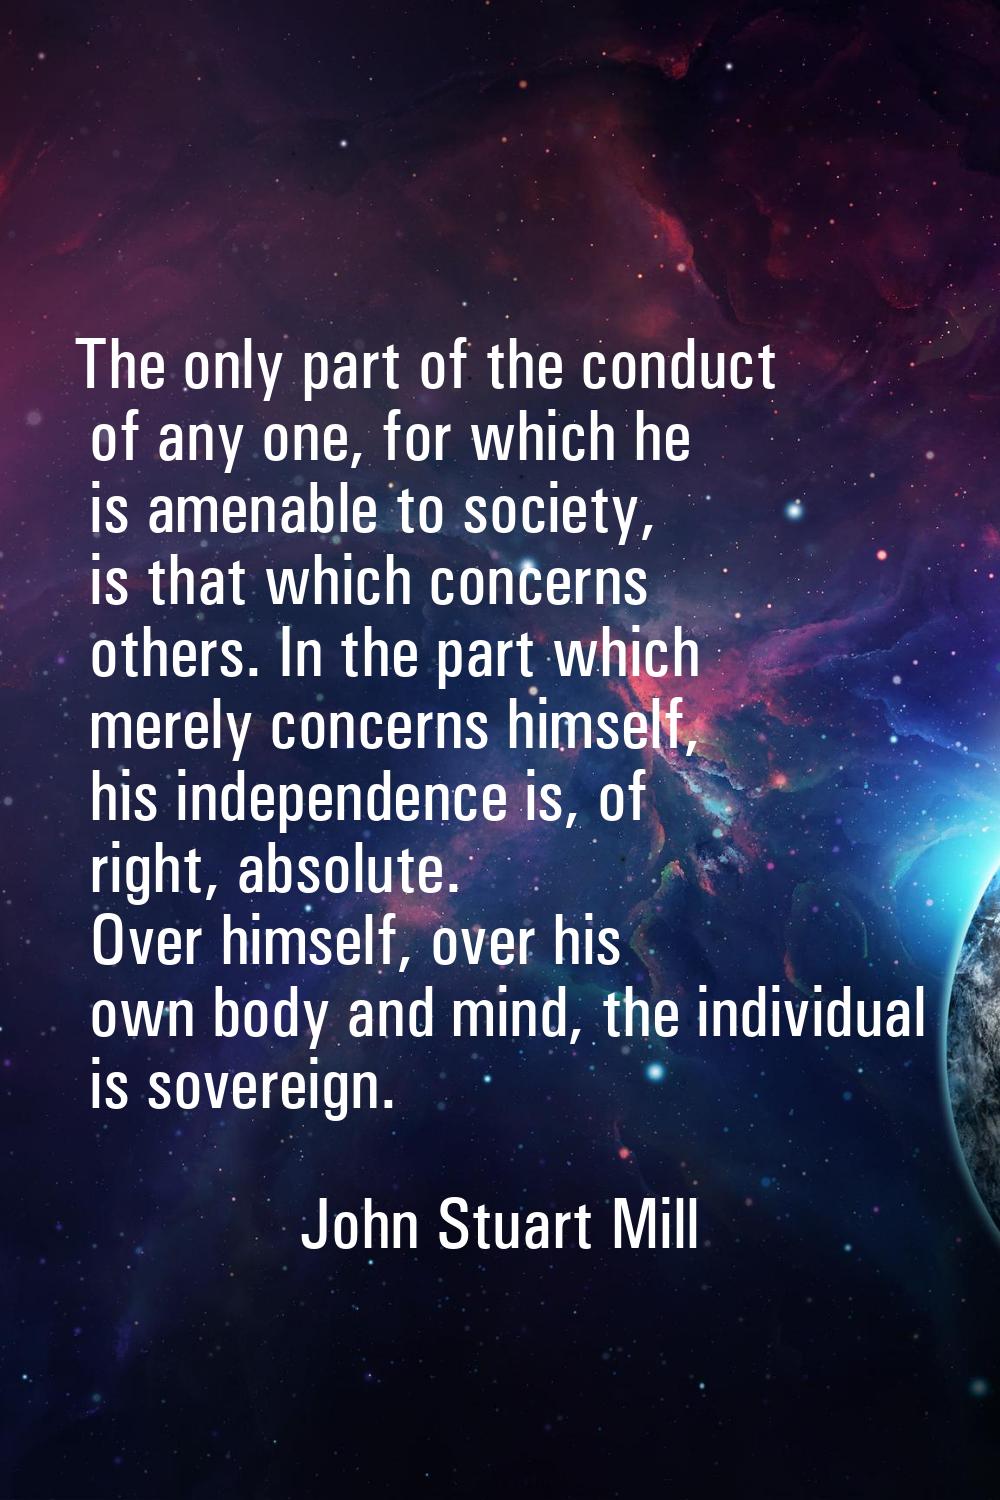 The only part of the conduct of any one, for which he is amenable to society, is that which concern